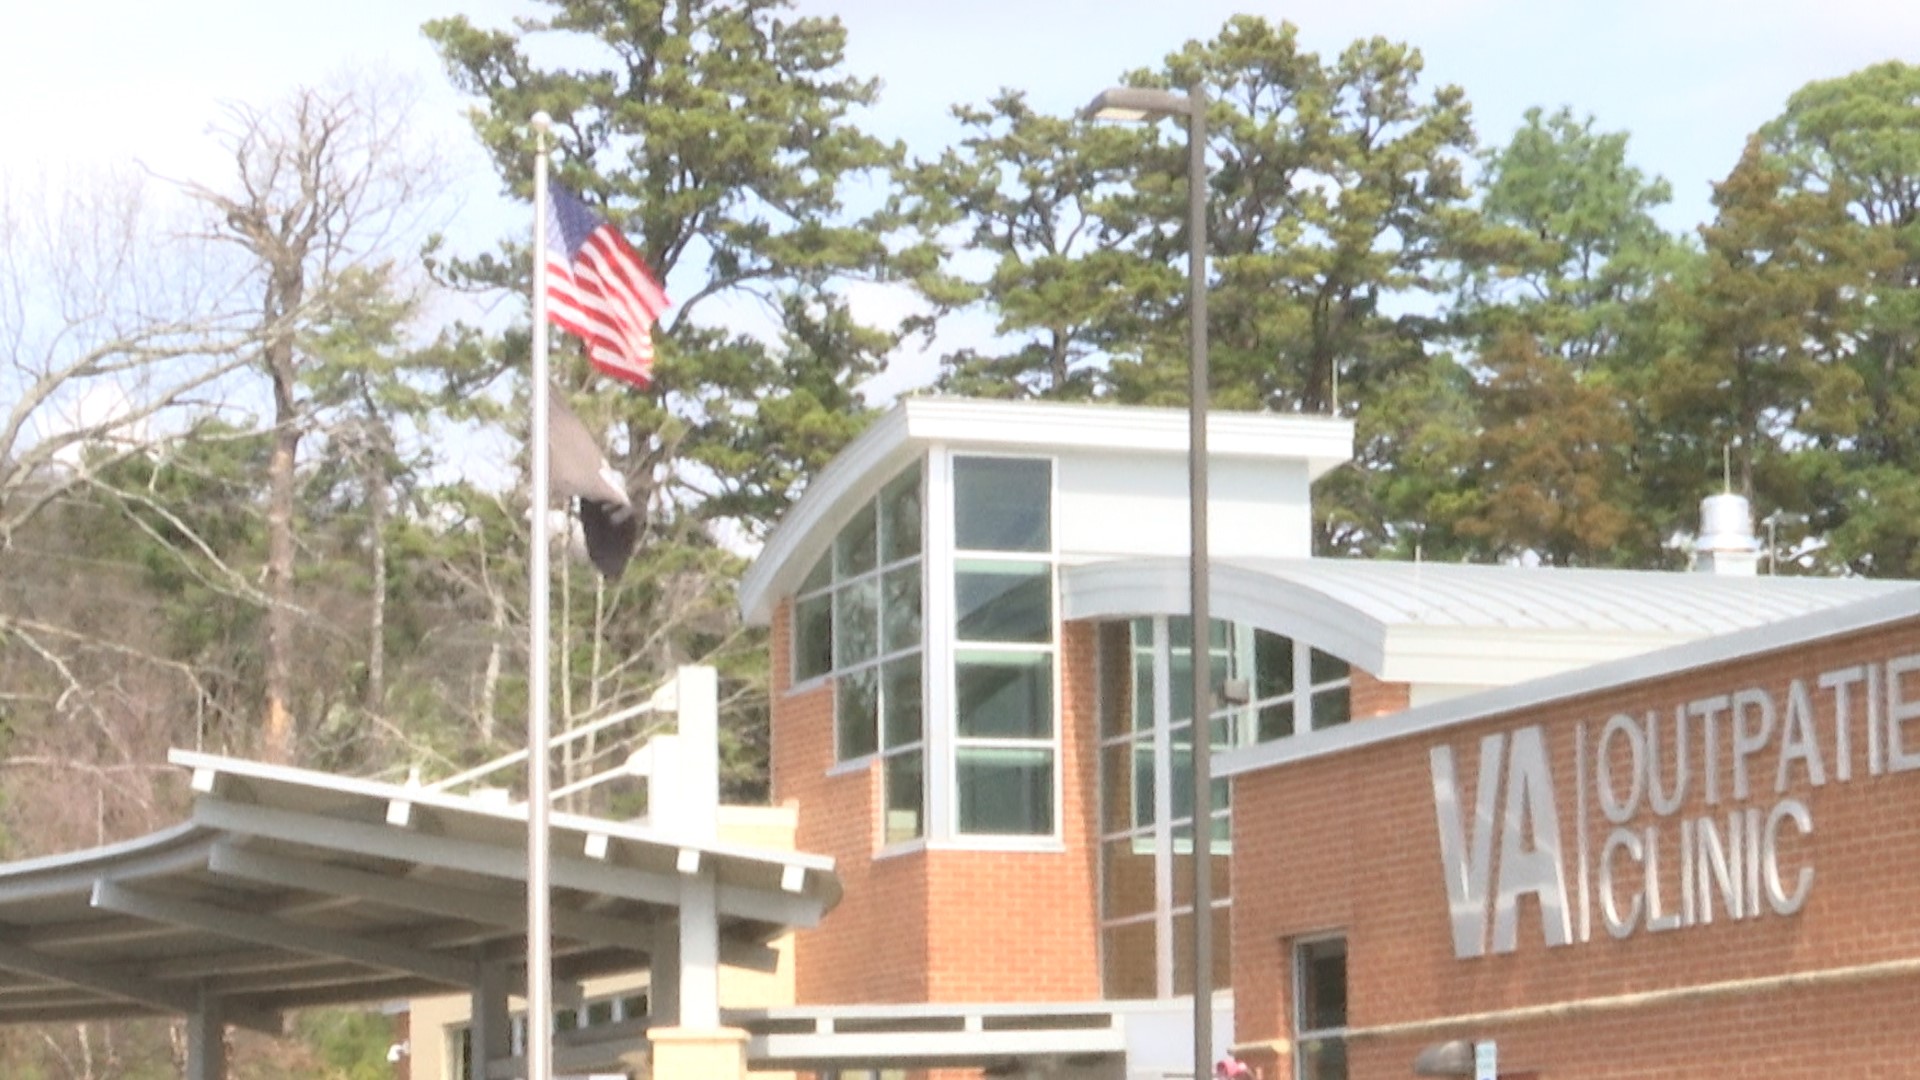 VA clinics in Alabama opened vaccination to eligible veterans of all ages.